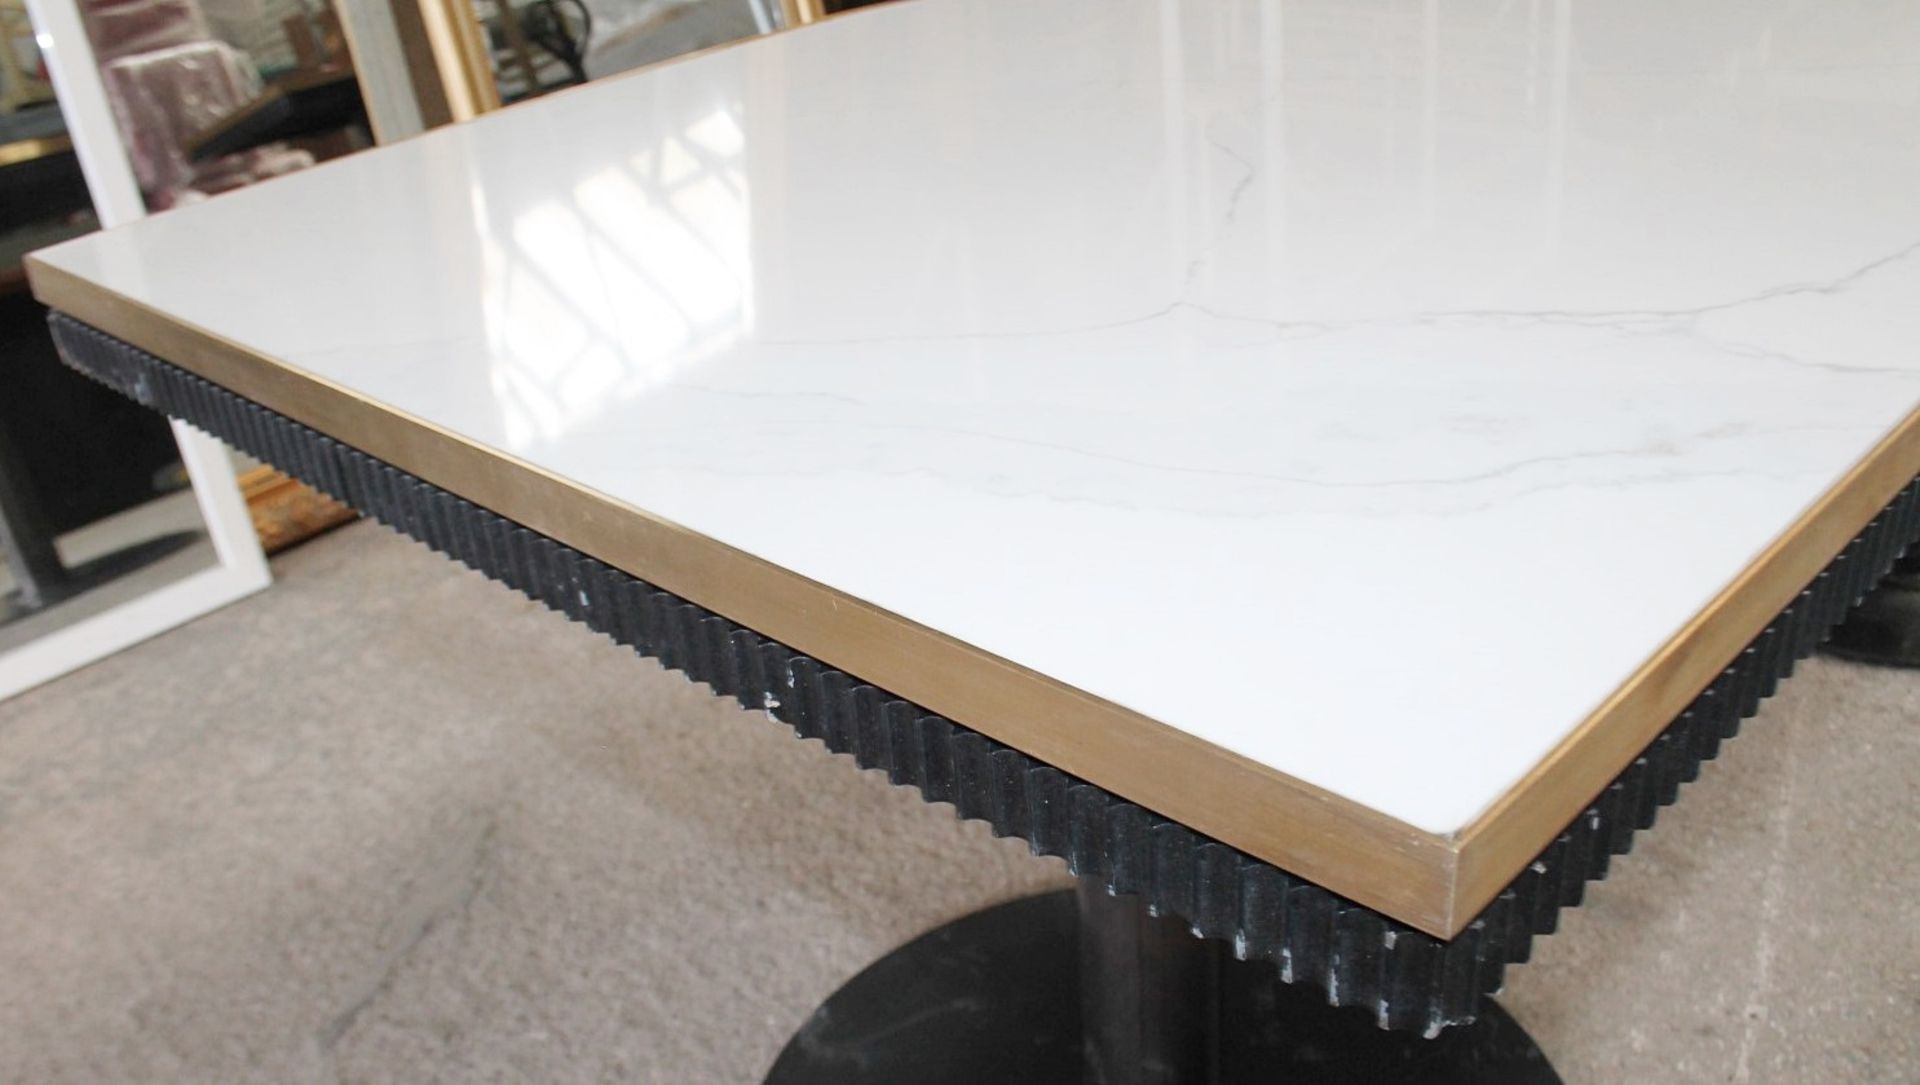 1 x Specially Commissioned Industrial-Style Marble-Topped U-Shaped Bistro Table With A Brass Trim - - Image 5 of 9